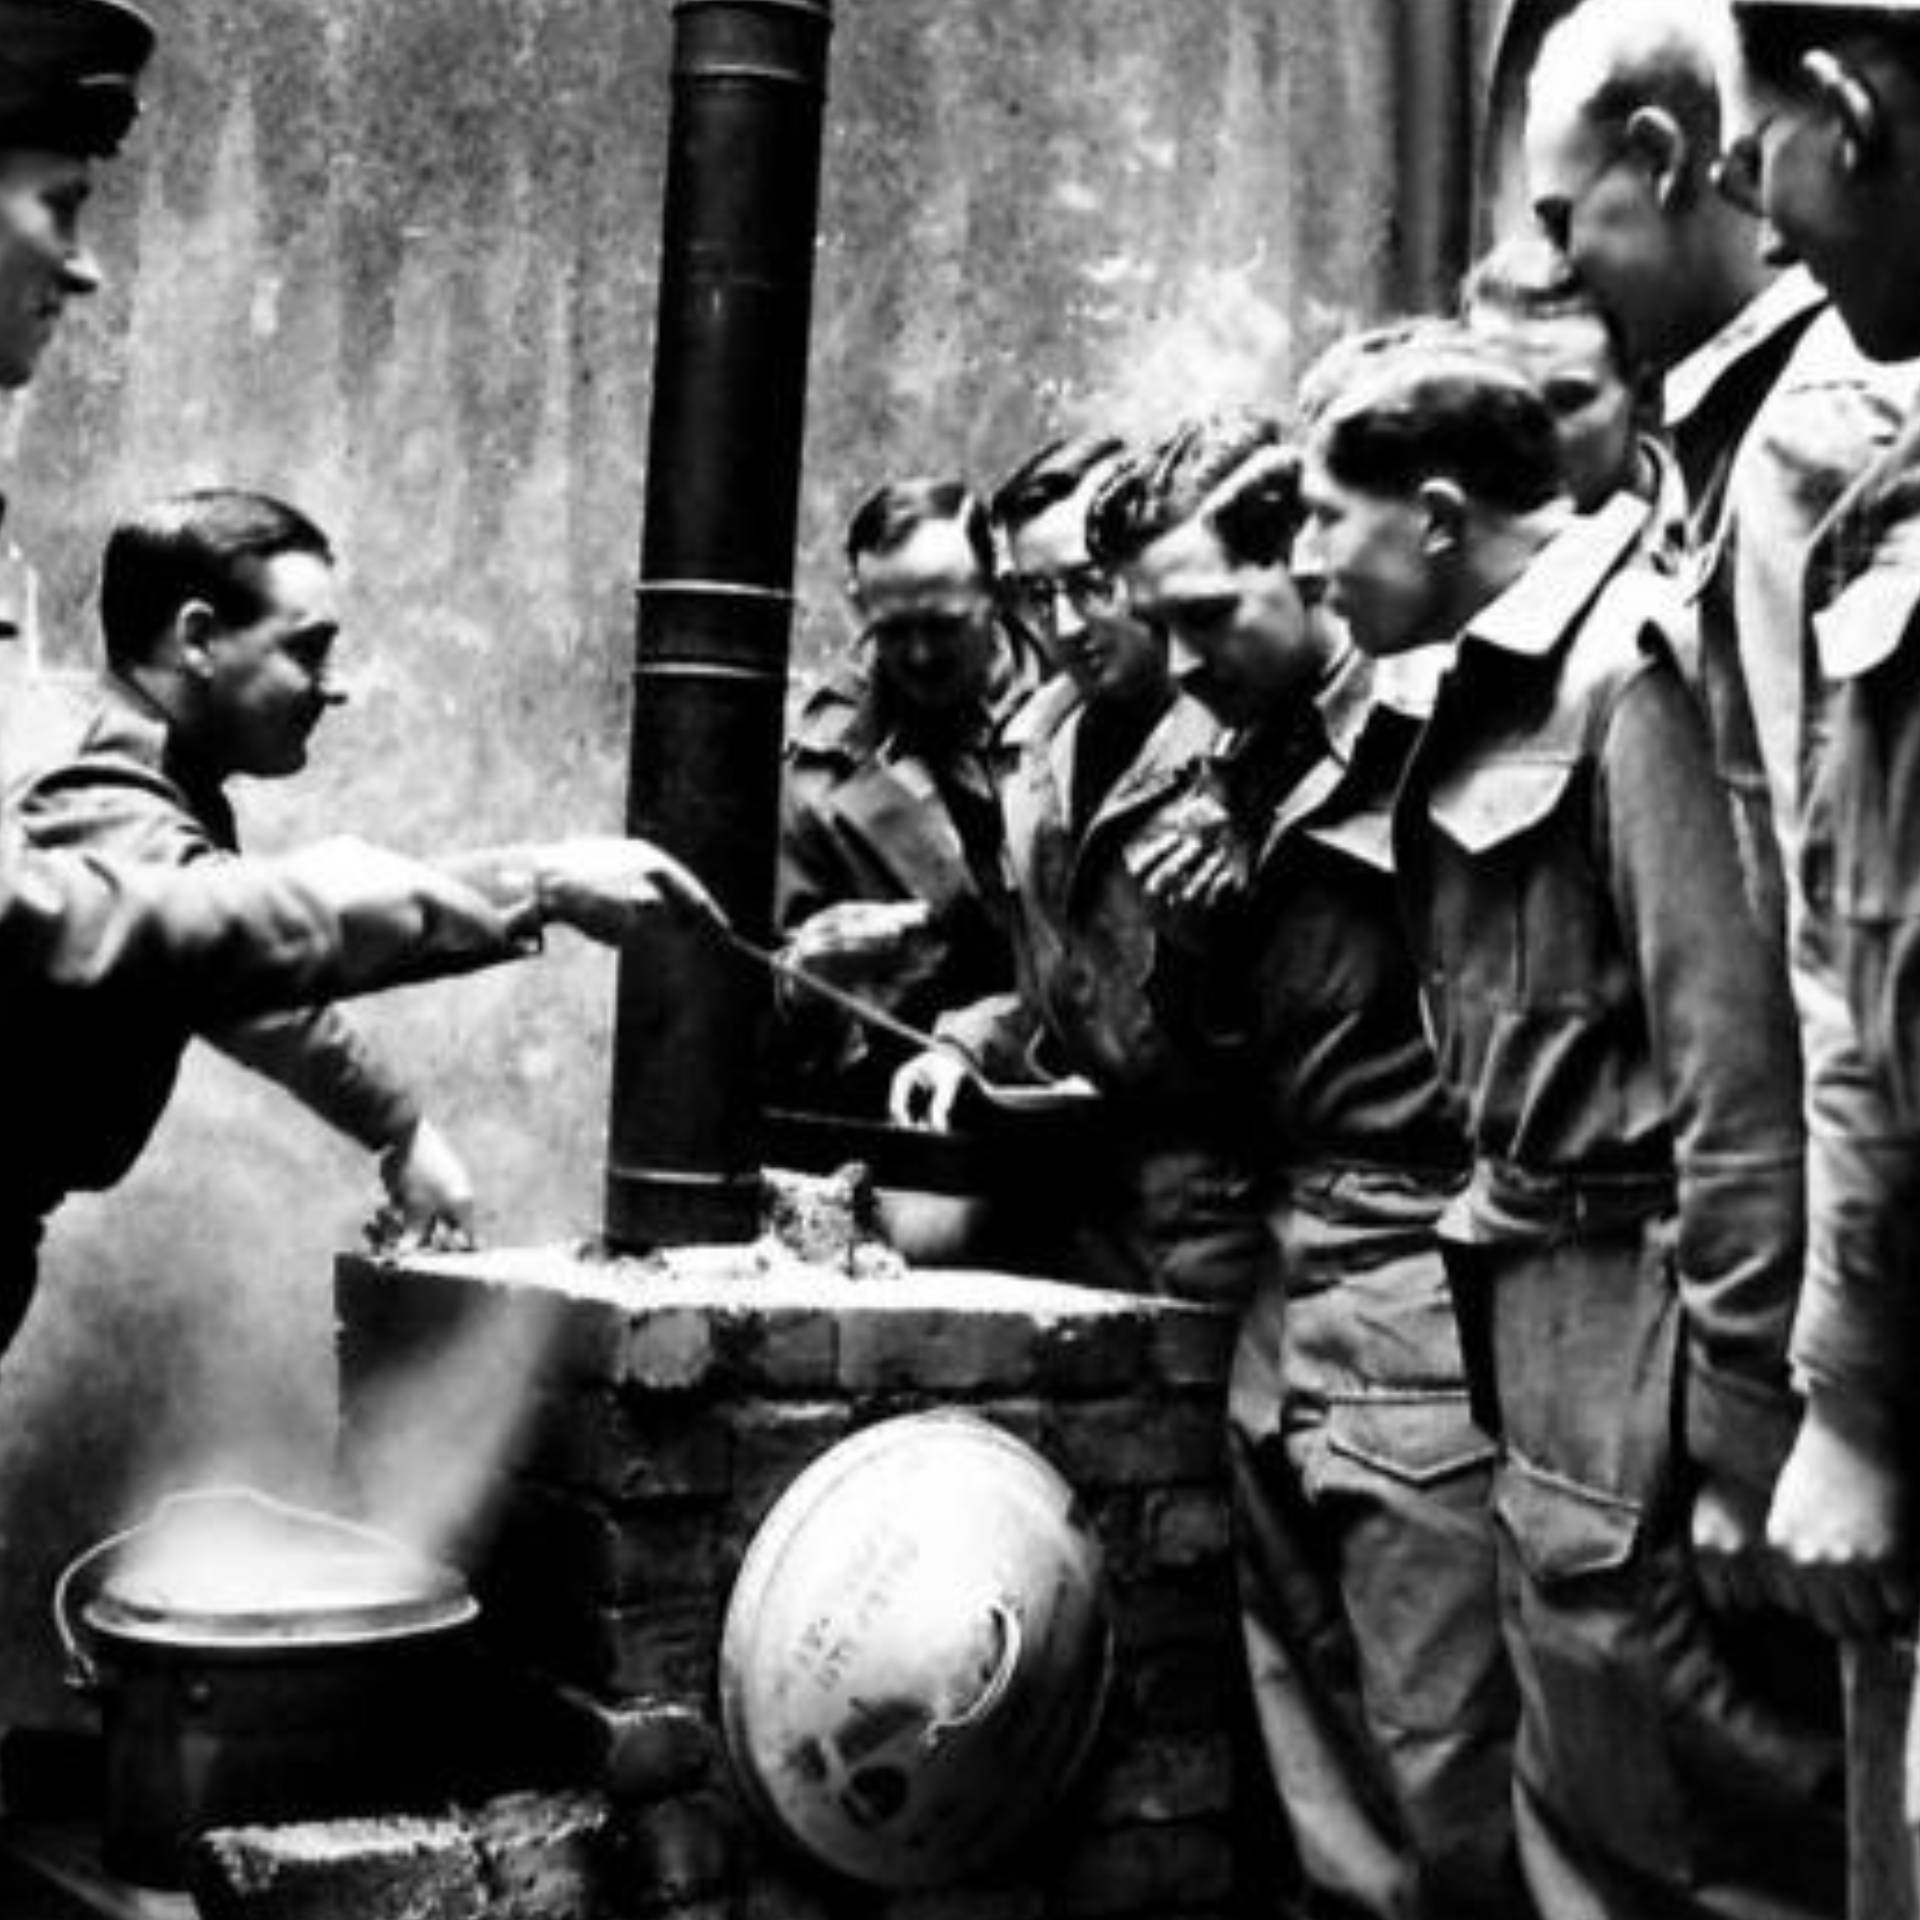 Fine oxtail soup prepared in an improvised field kitchen using a bin lid as an oven door at 61st Division Officer's Messing Course at Portrush, Co. Antrim.